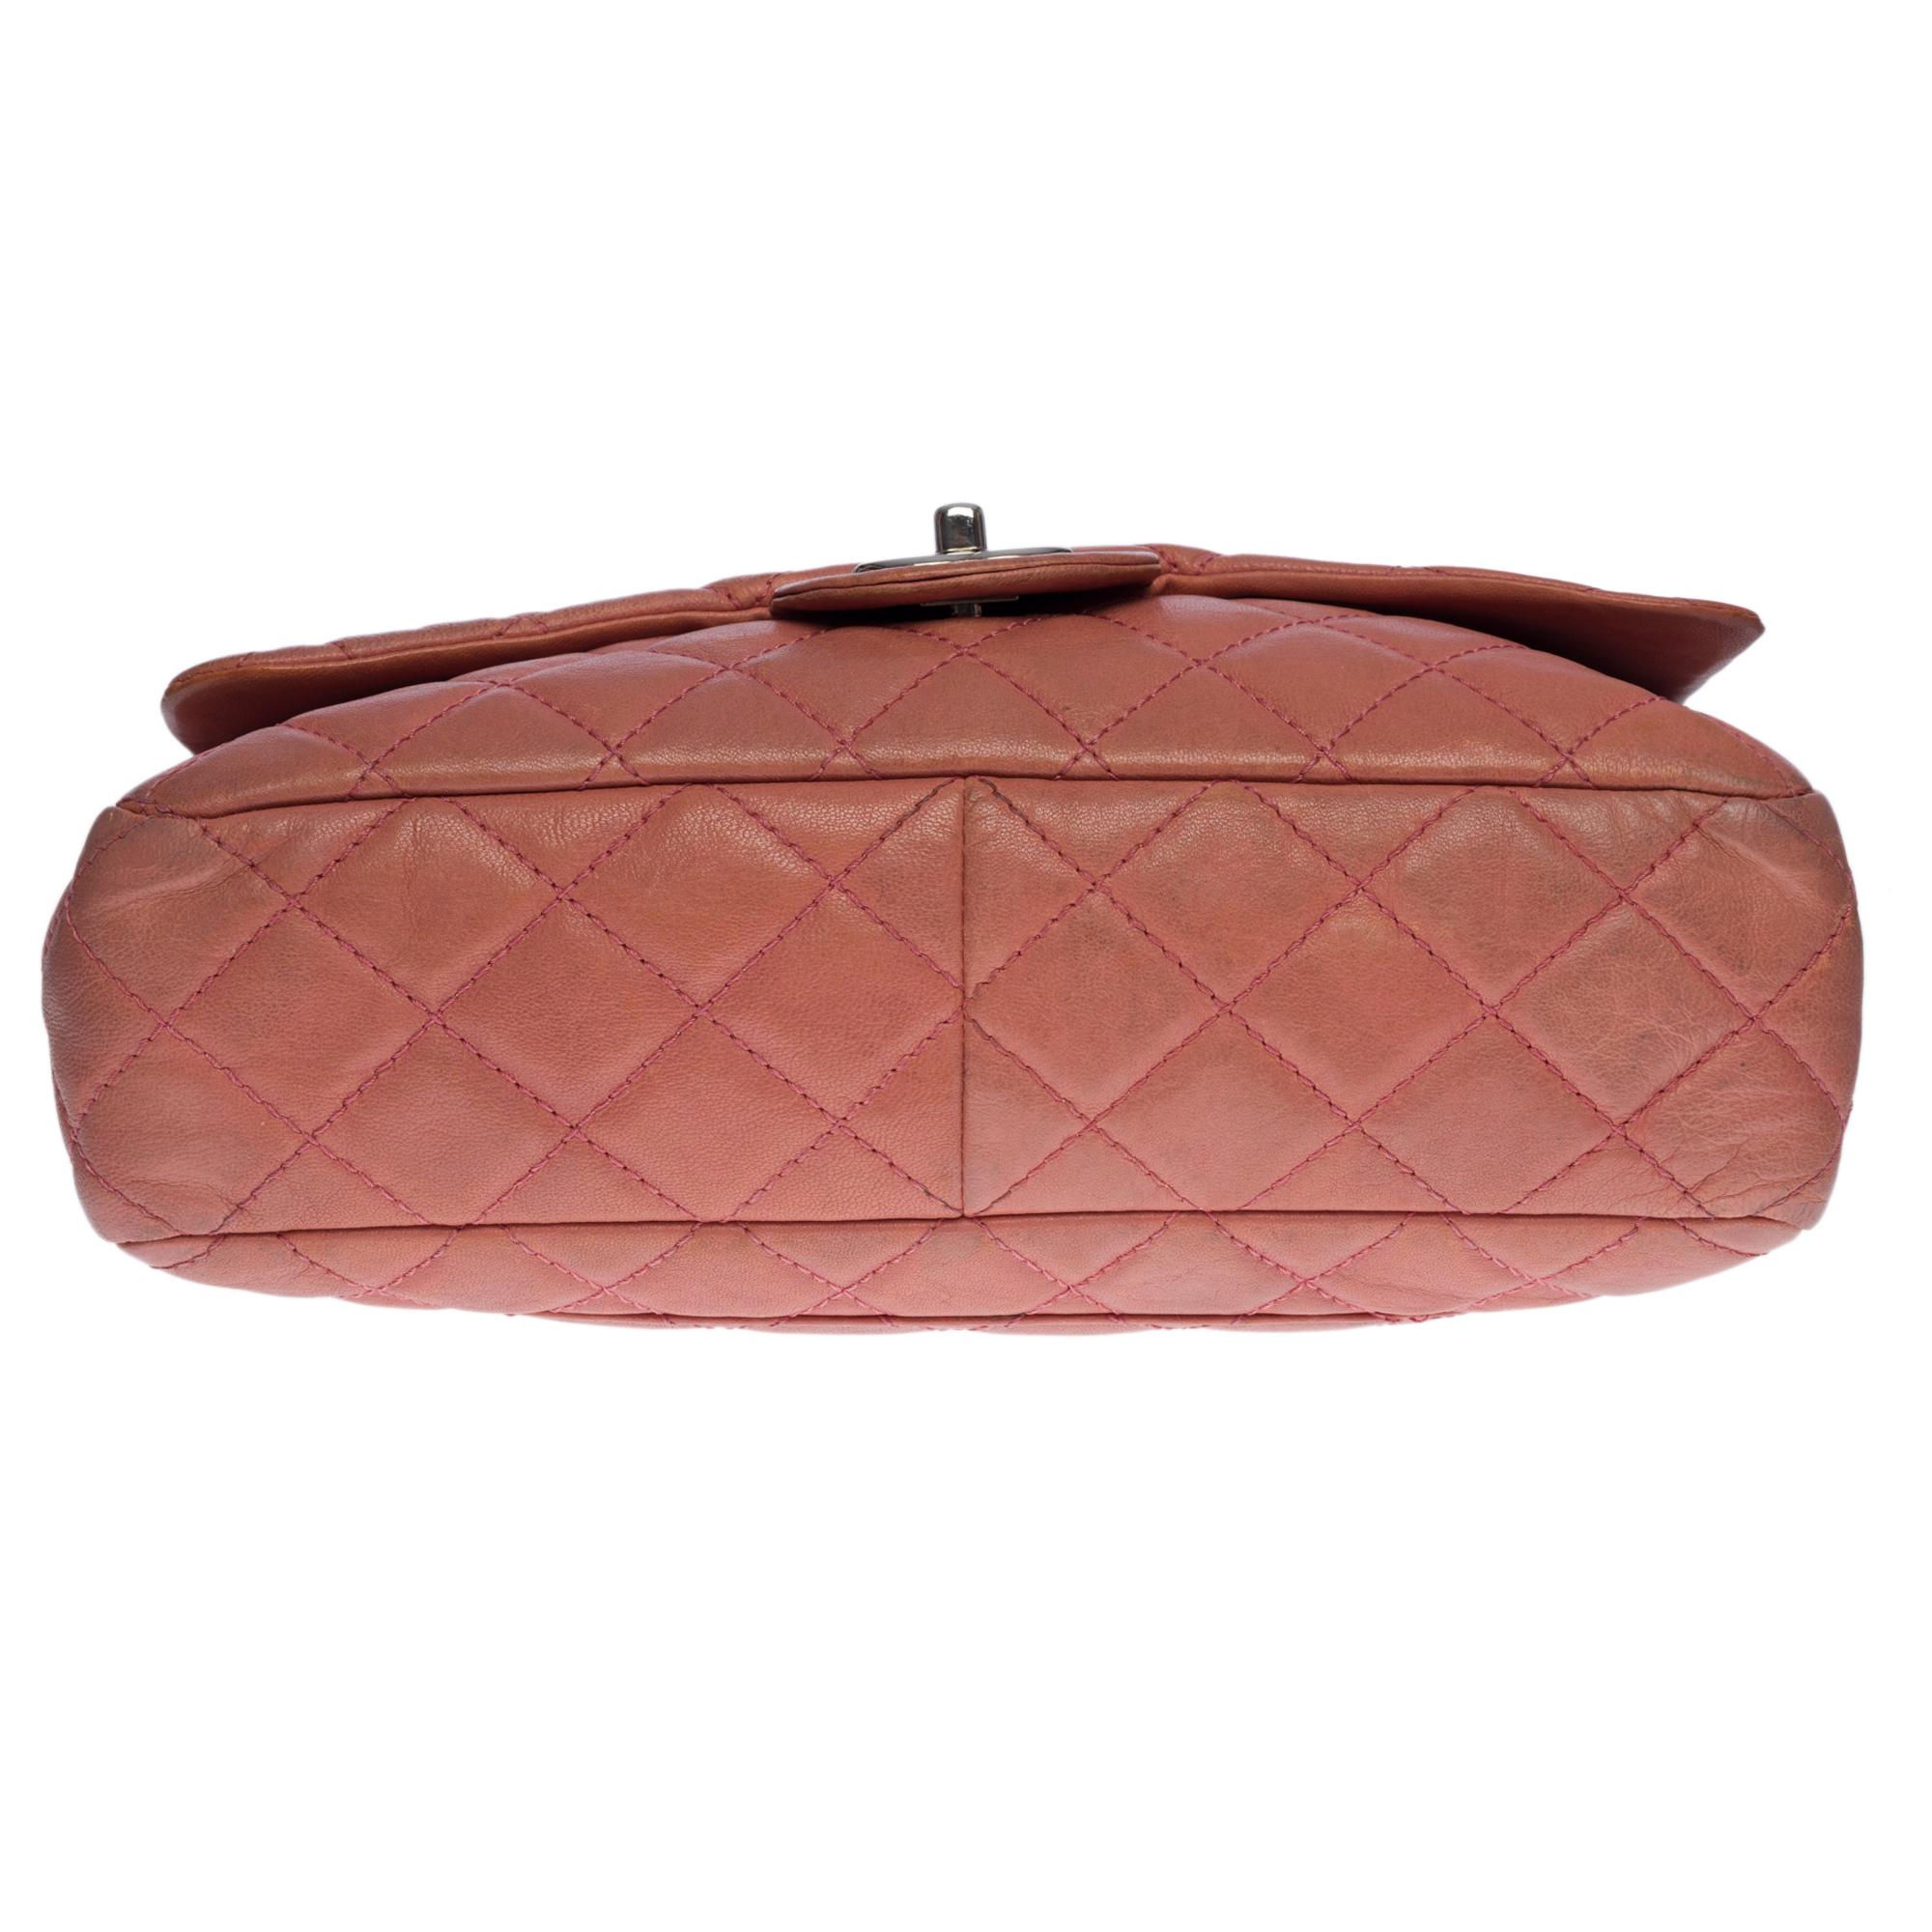  The Chanel Timeless/Classique Jumbo single flap bag handbag in powder pink aged For Sale 3